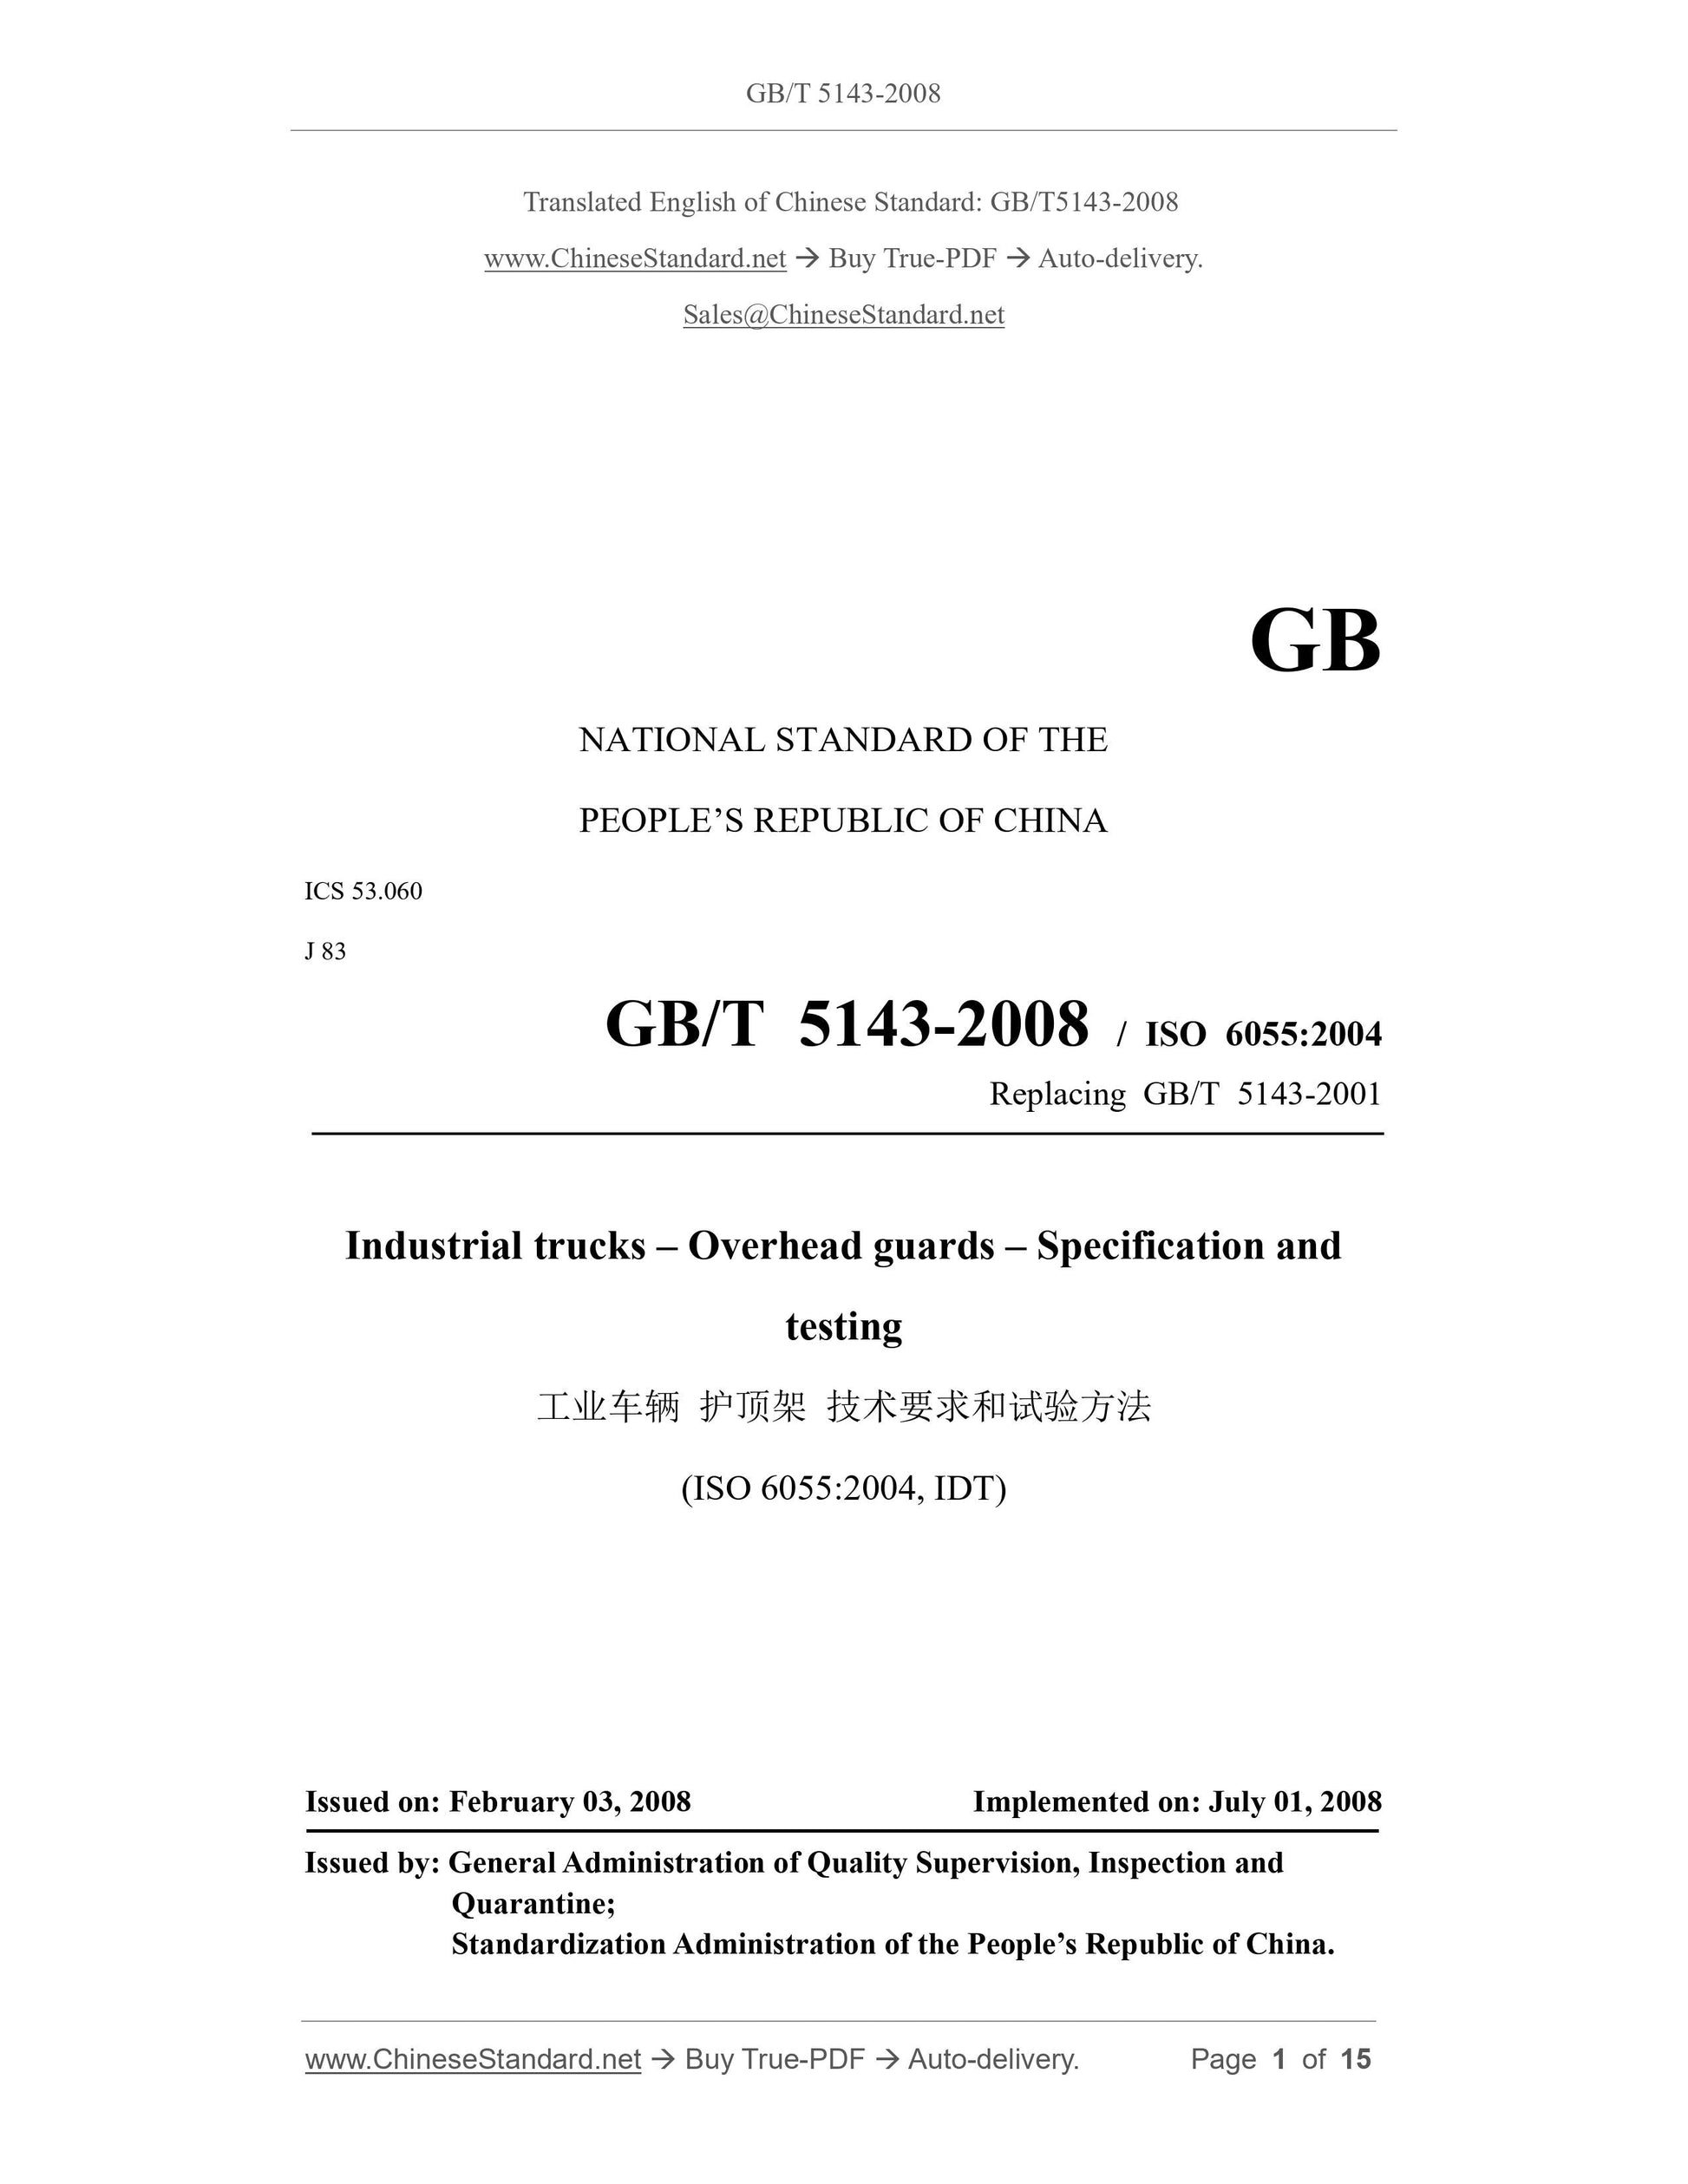 GB/T 5143-2008 Page 1